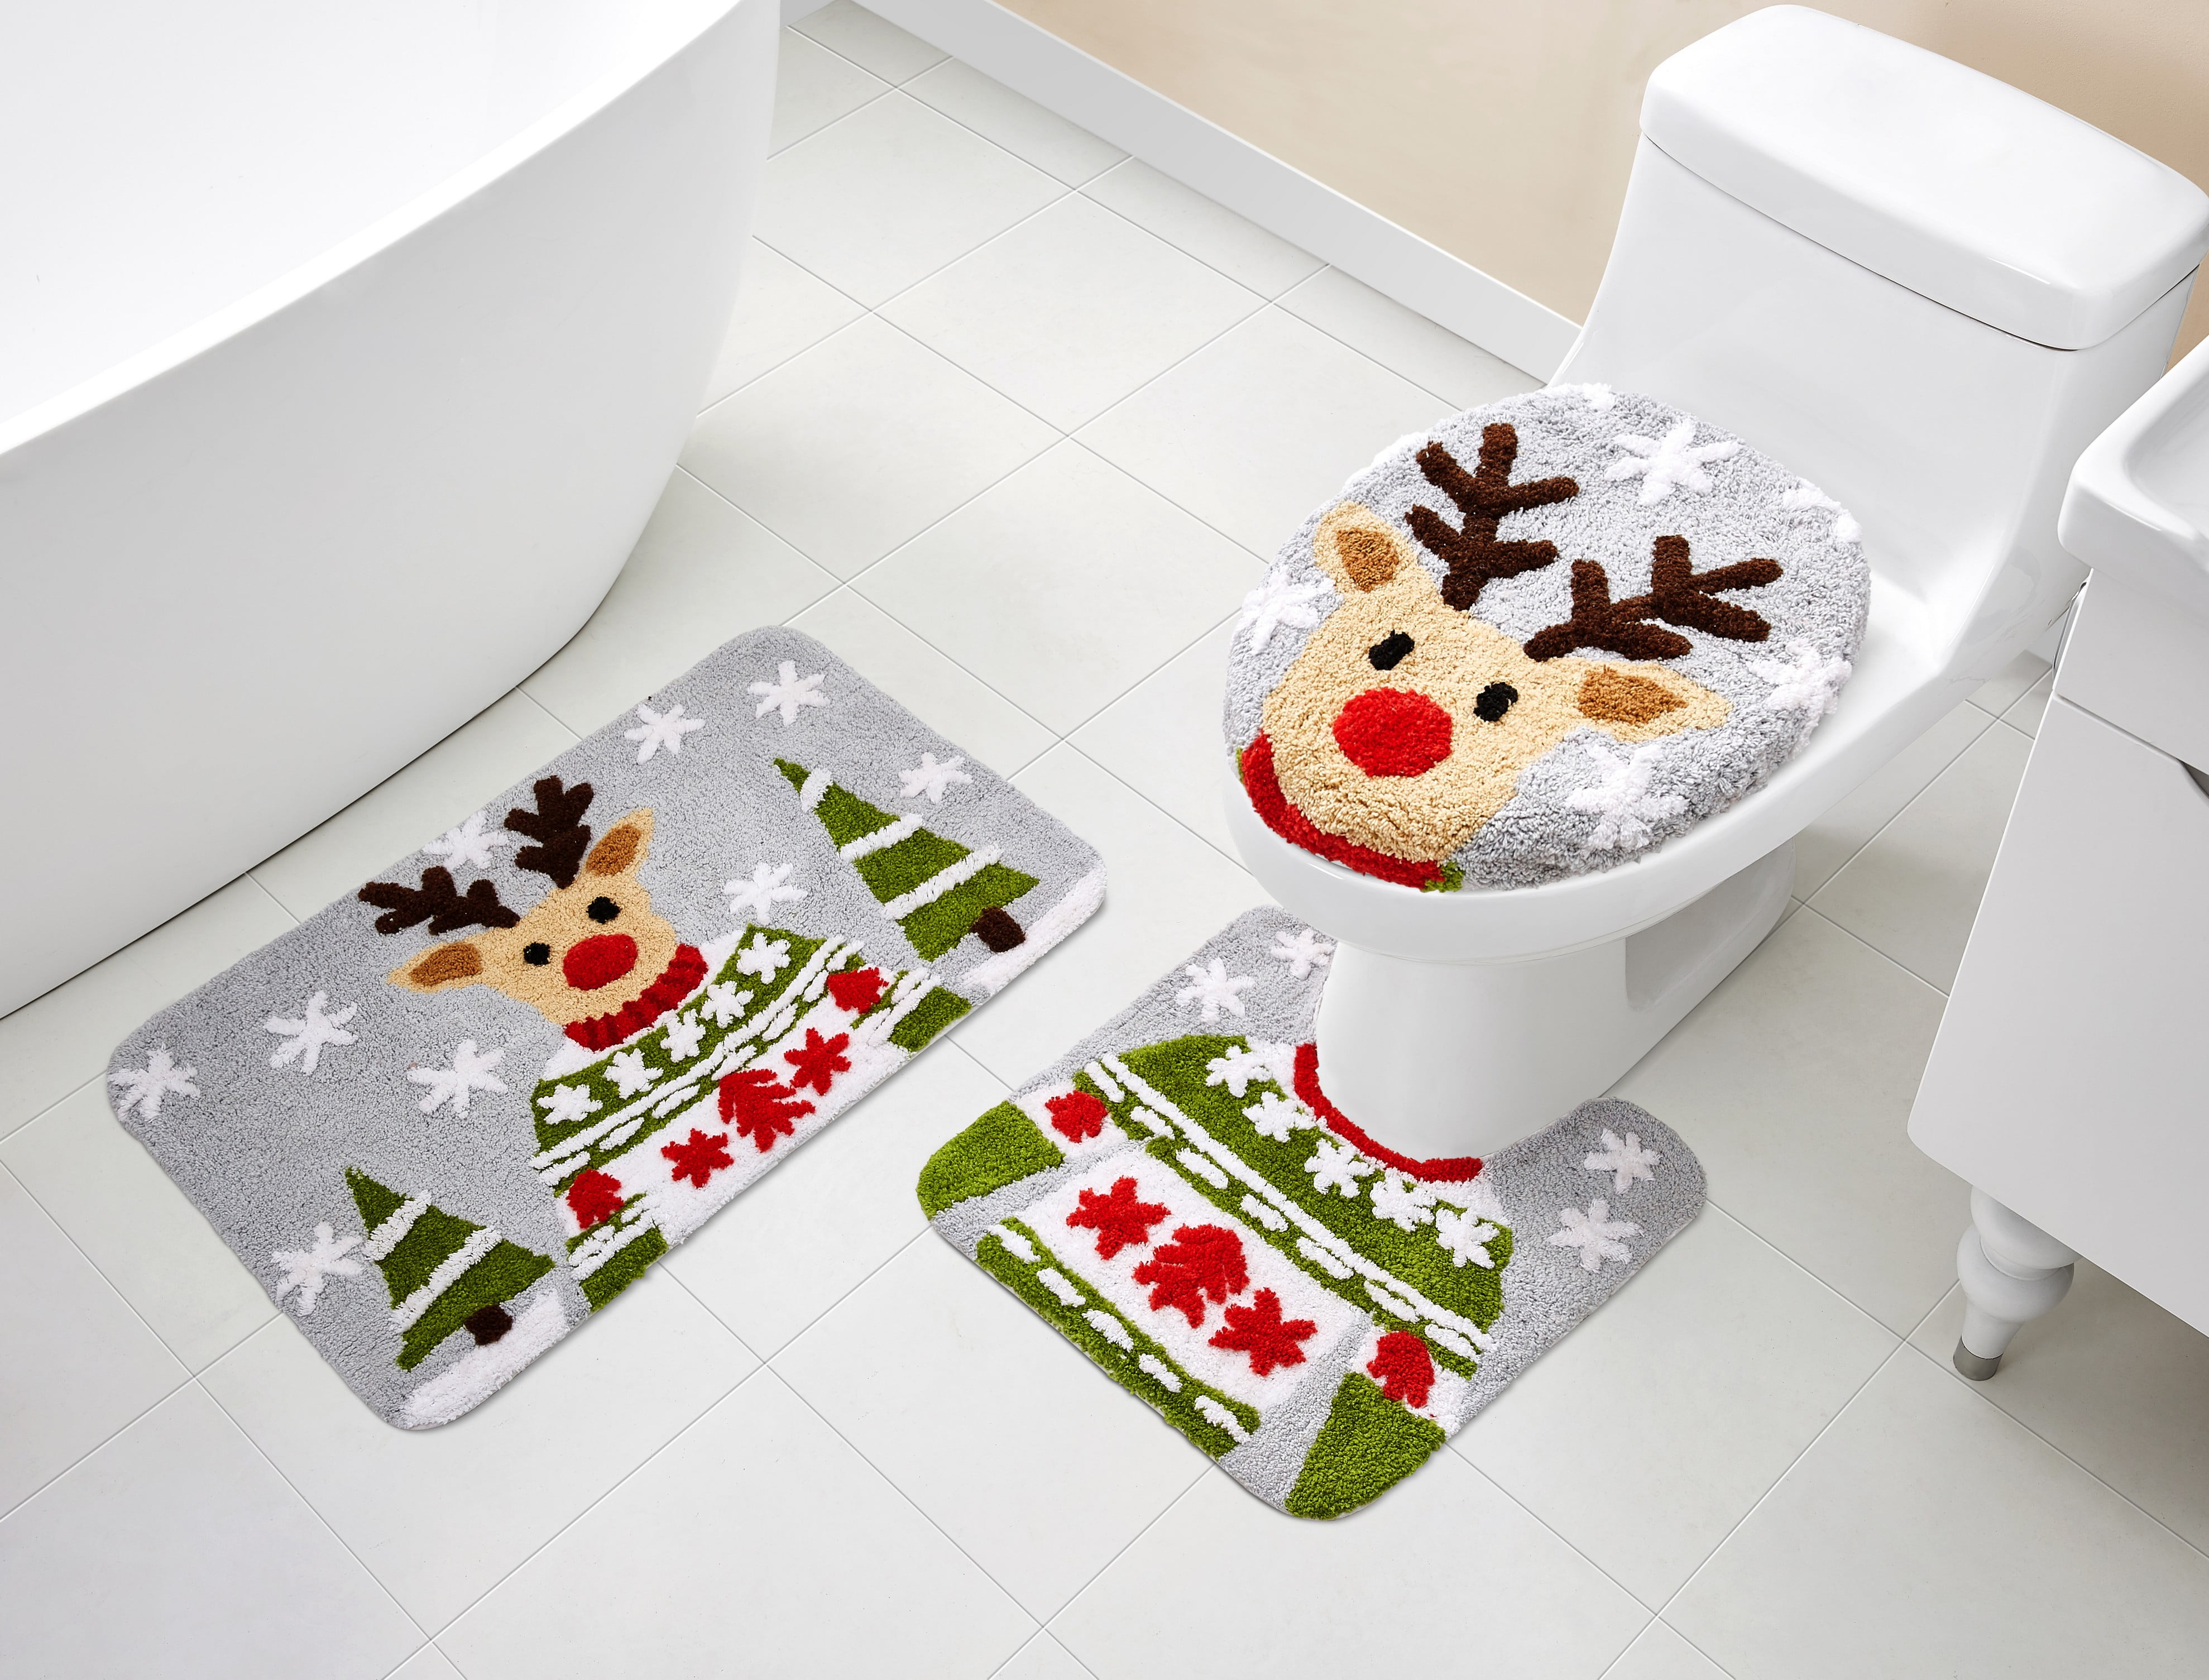 Winter Wonderland Christmas 3 Piece Bathroom Rug Set Bath Mat Shower Rug Perfact for Tub Shower Bath Room Home Decor 16 x 24 Inches Lid Cover Non-Slip with Rubber Backing U Shaped Contour Mat 